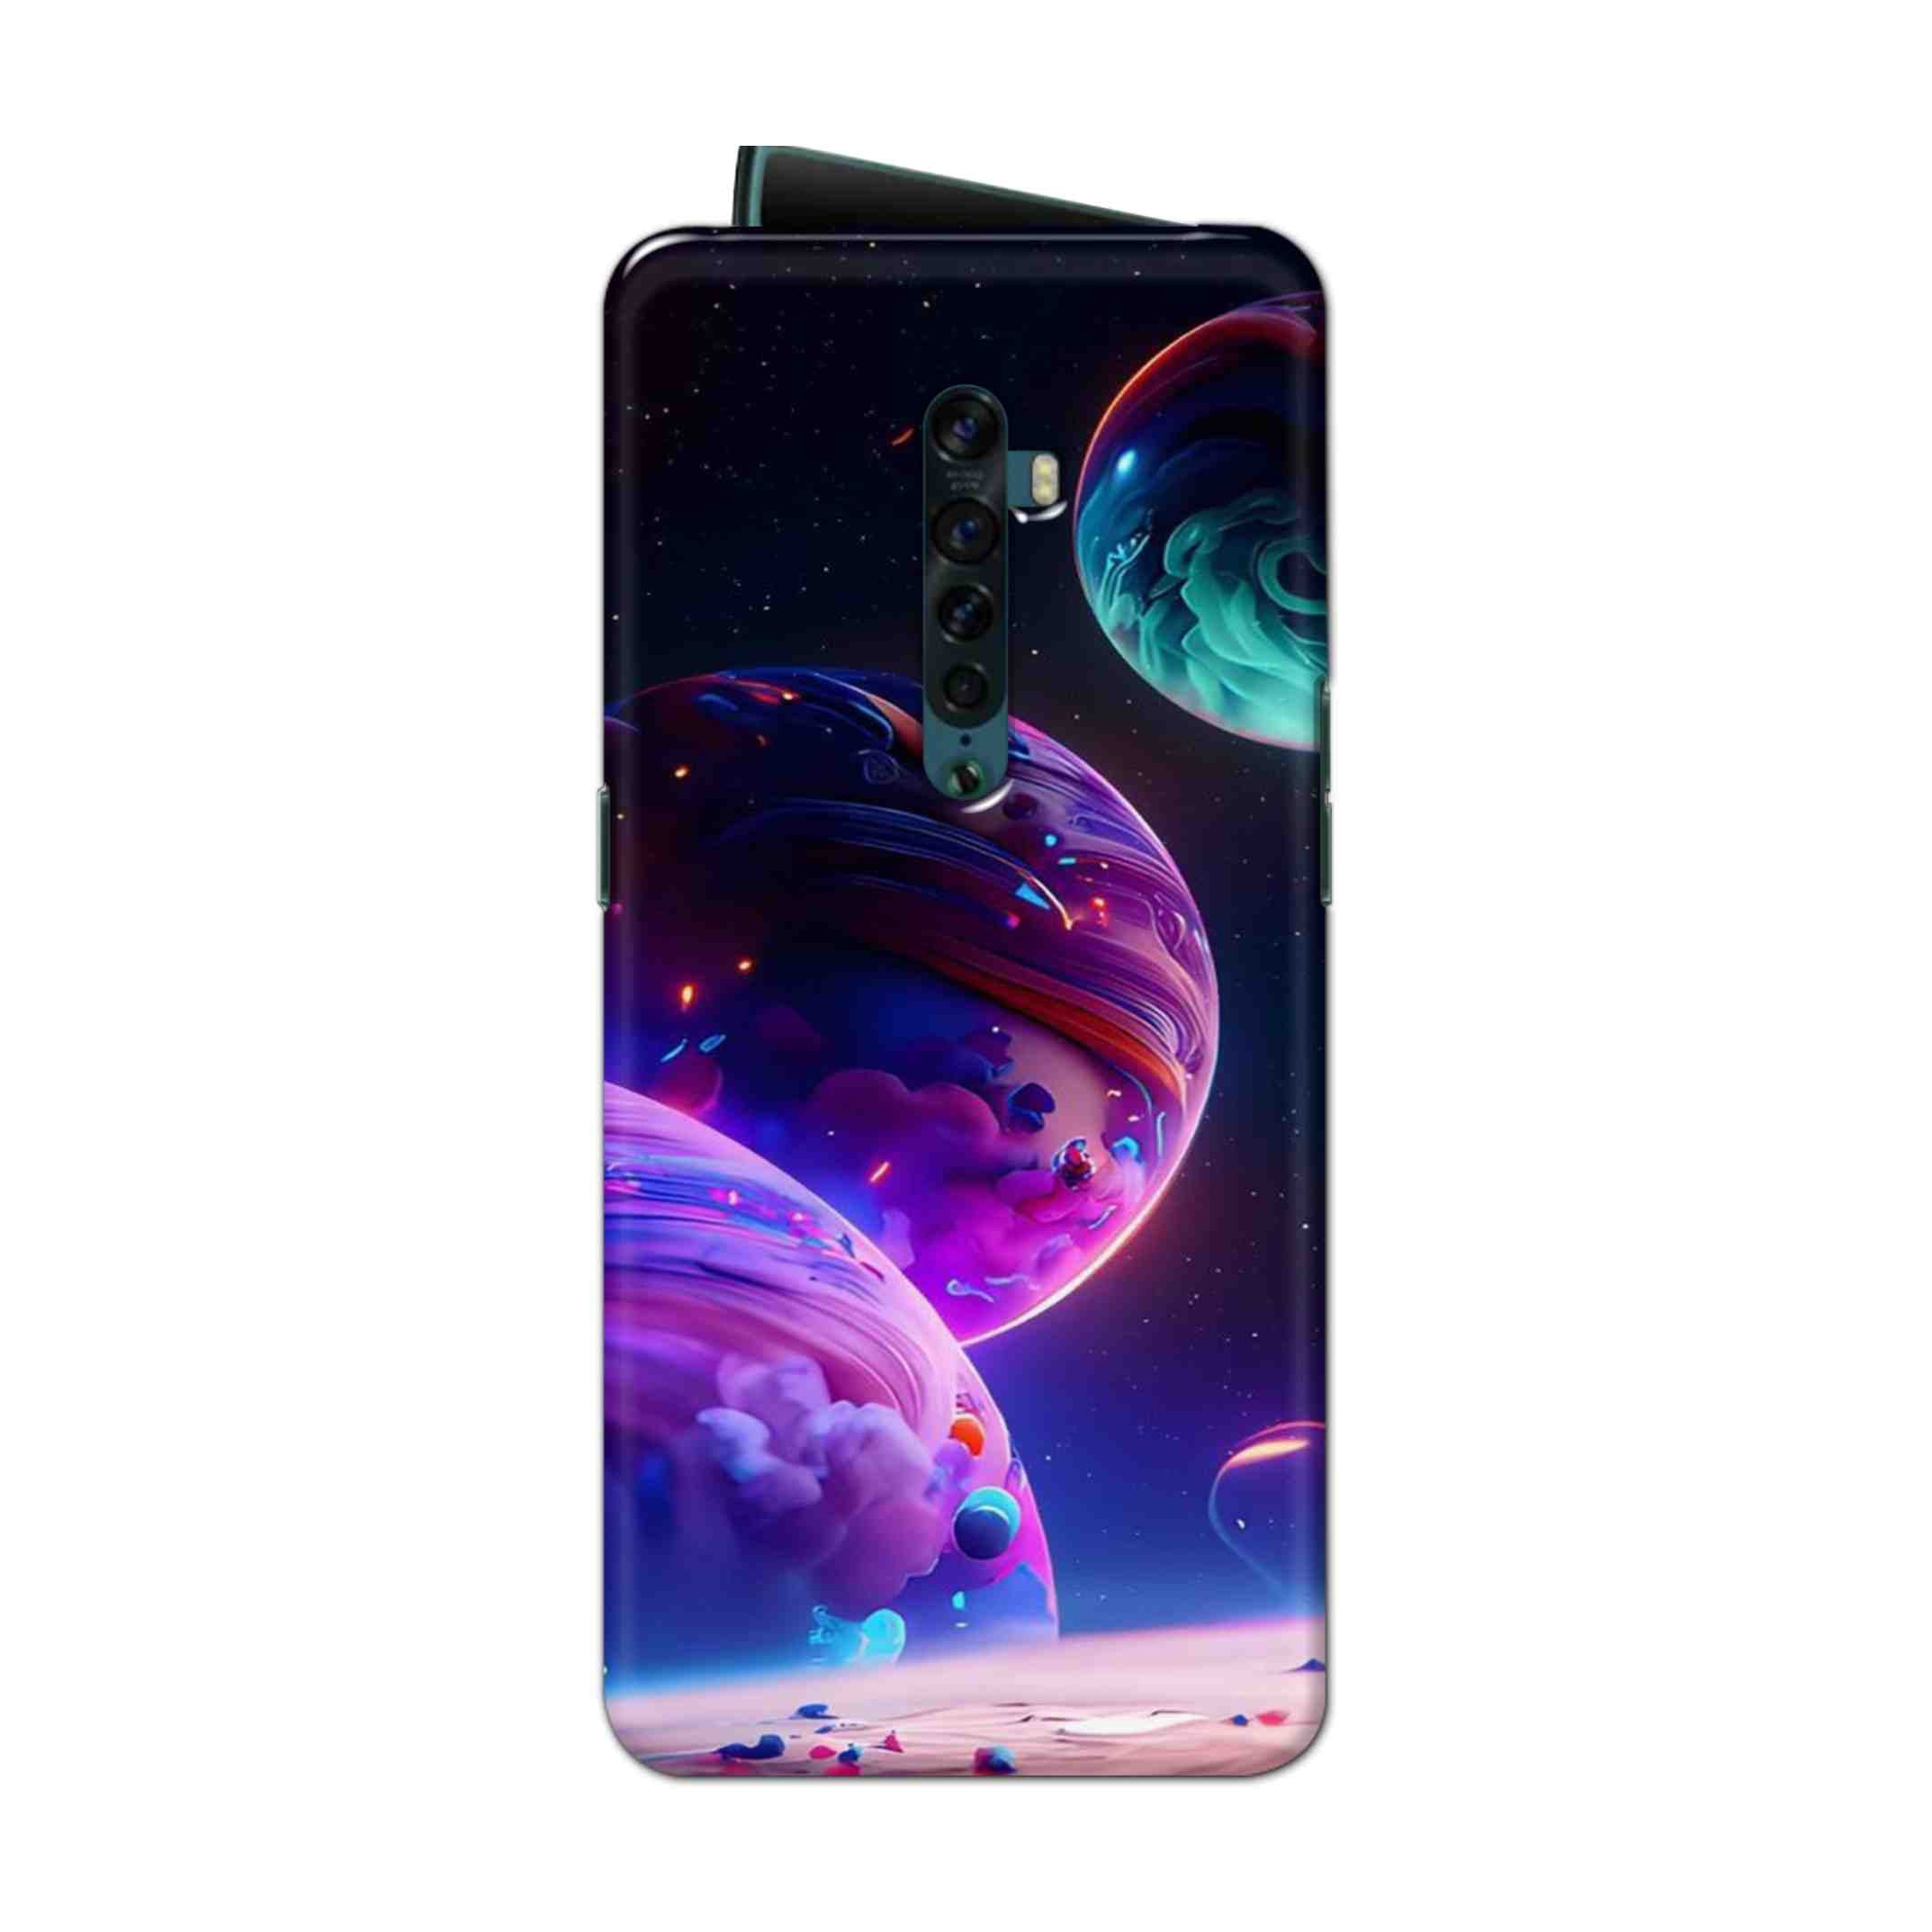 Buy 3 Earth Hard Back Mobile Phone Case Cover For Oppo Reno 2 Online